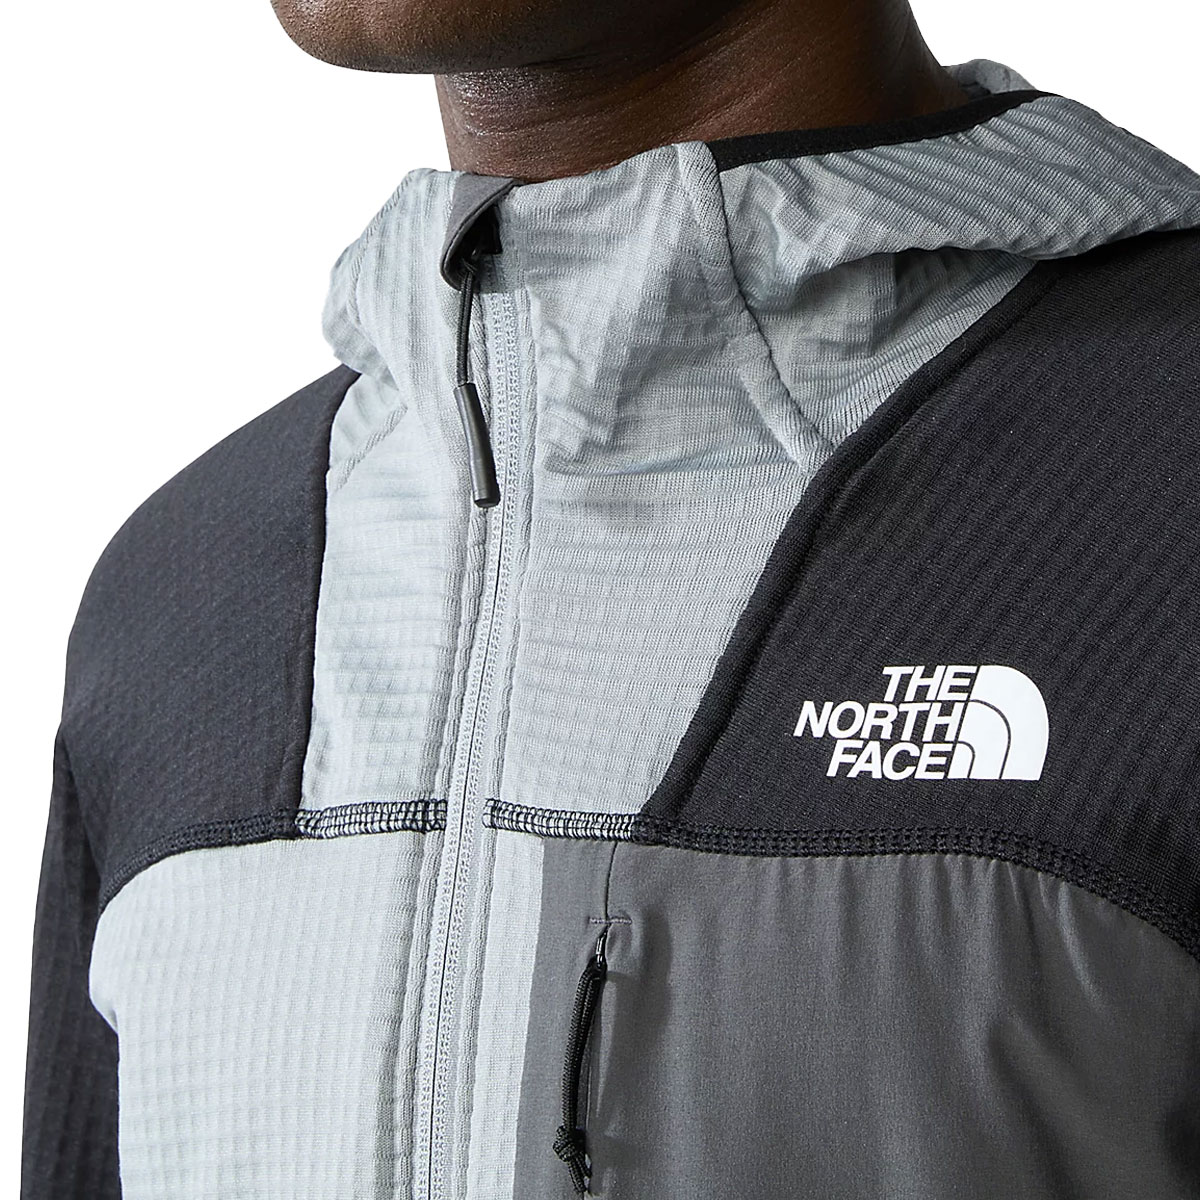 THE NORTH FACE - STORMGAP POWER GRID